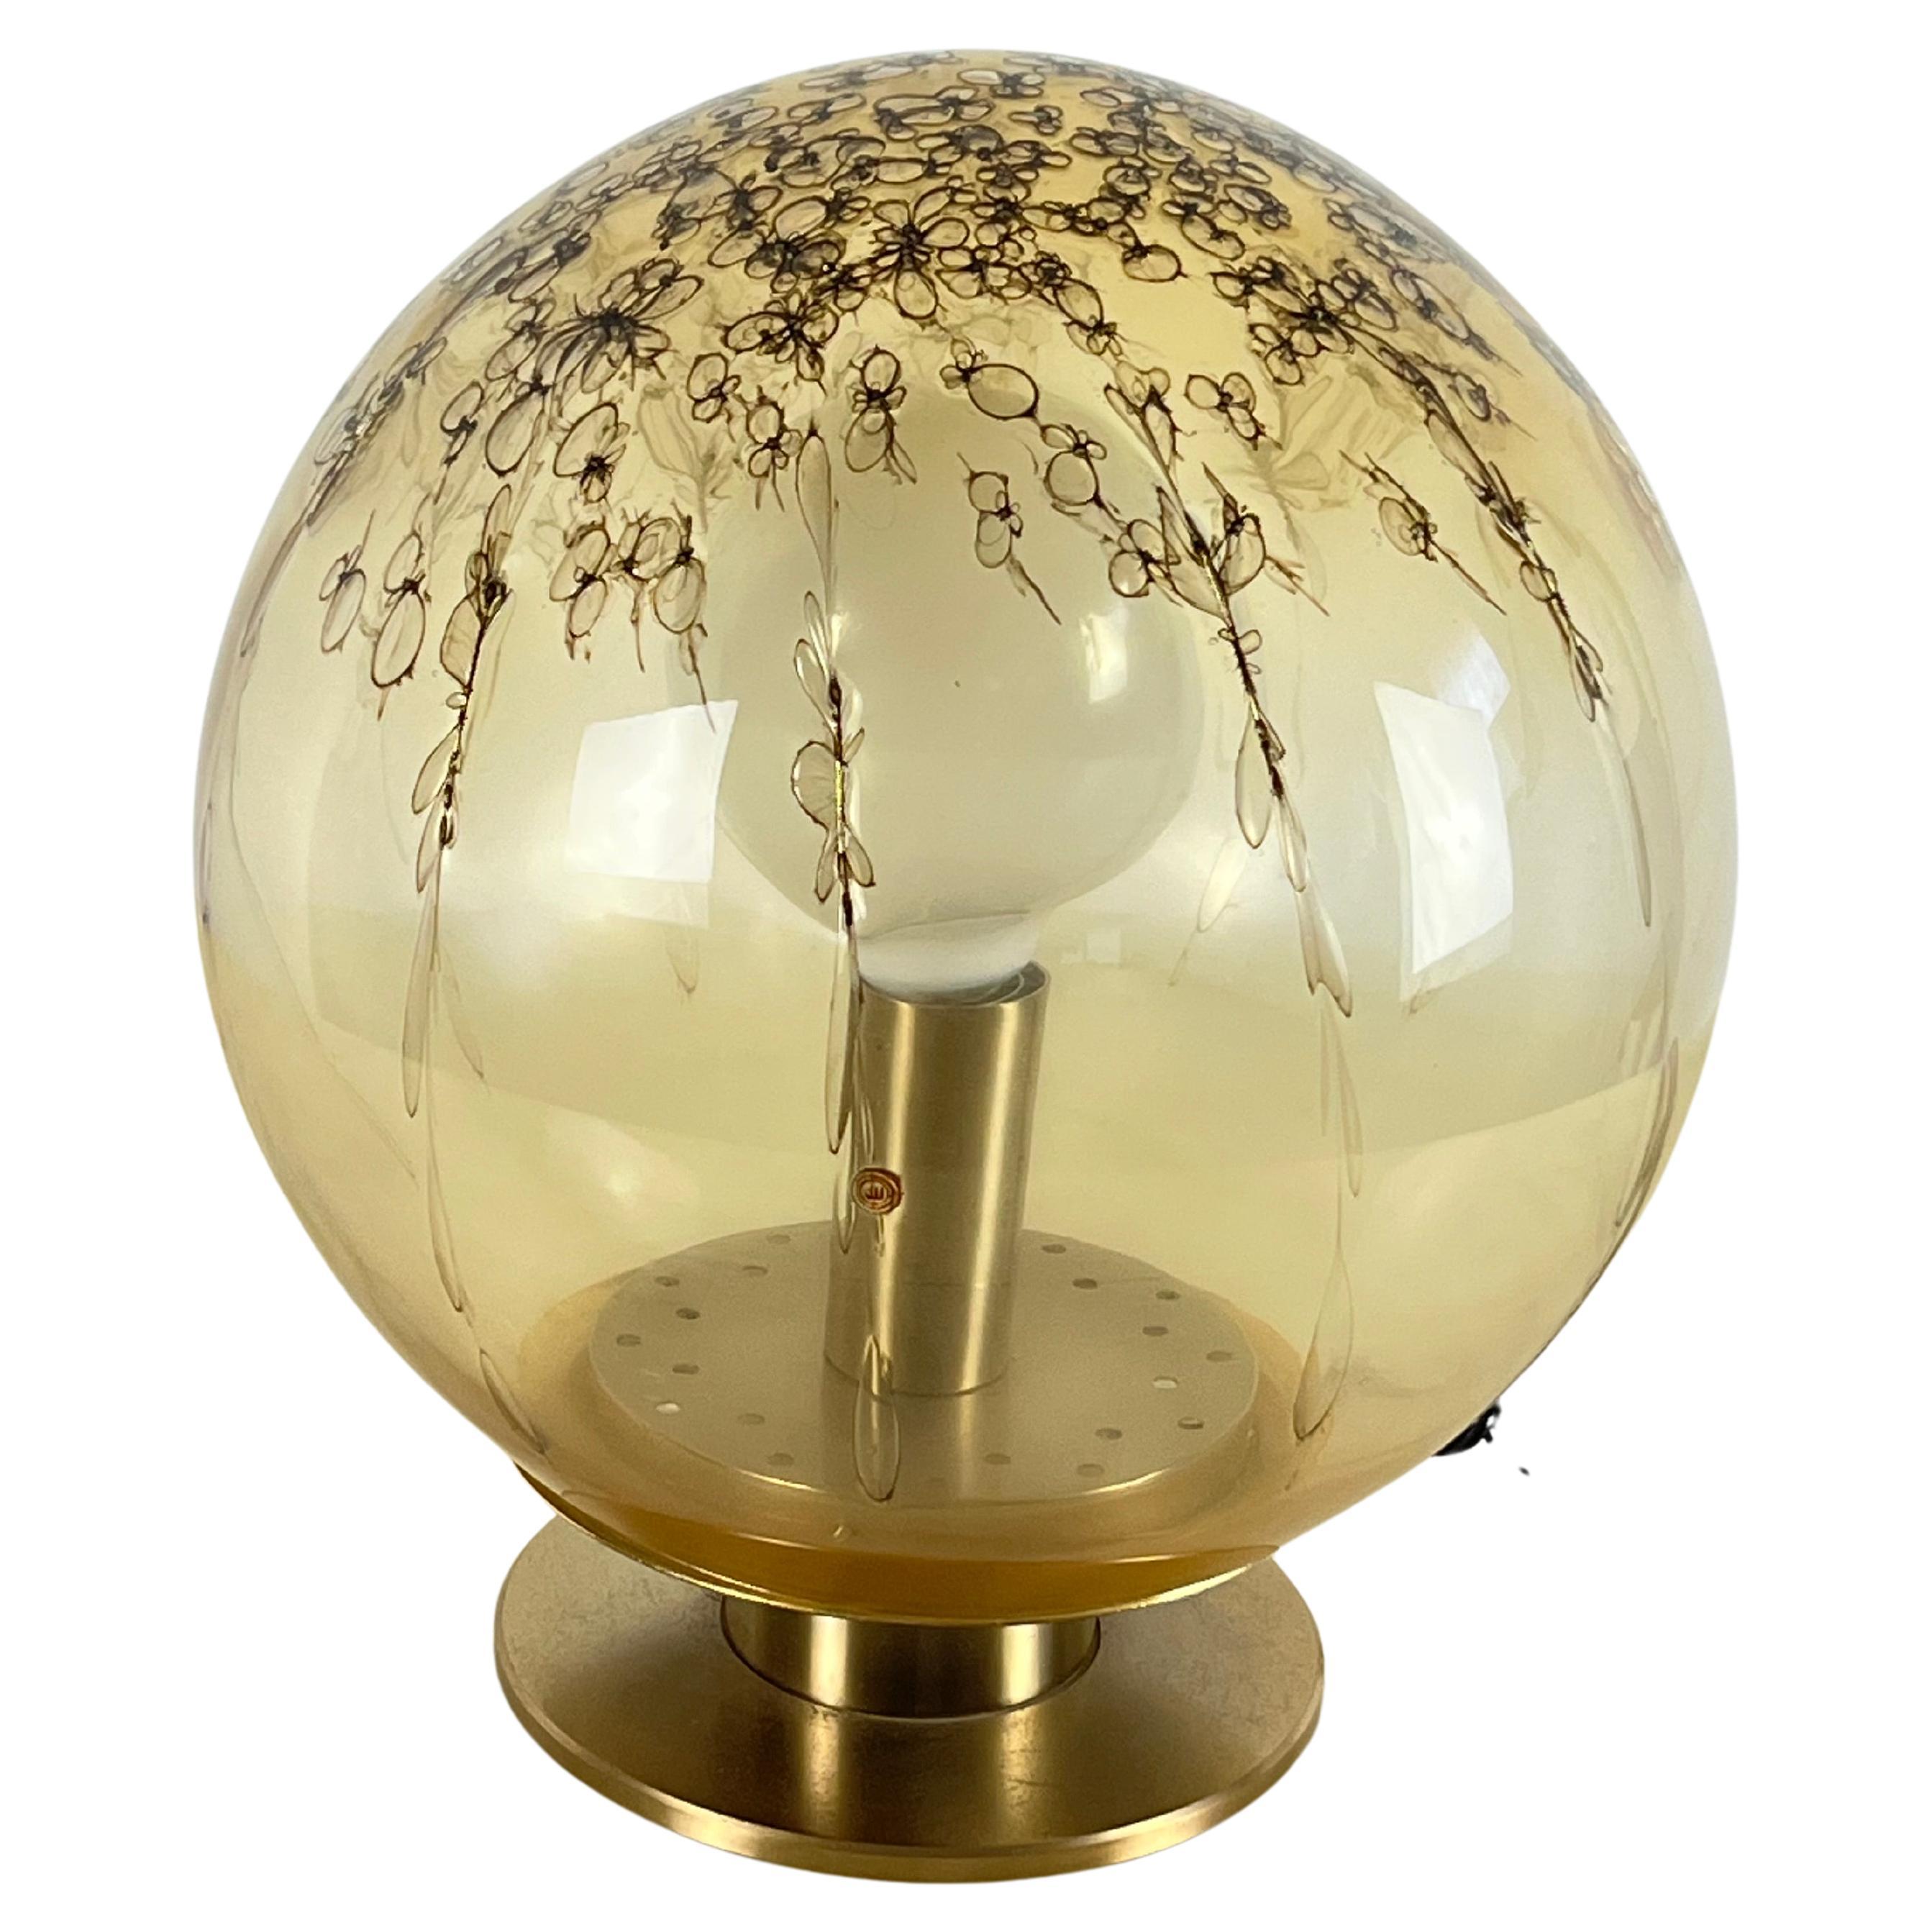 Vintage La Murrina Table Lamp, Murano glass and brass, Italy, 1968 For Sale